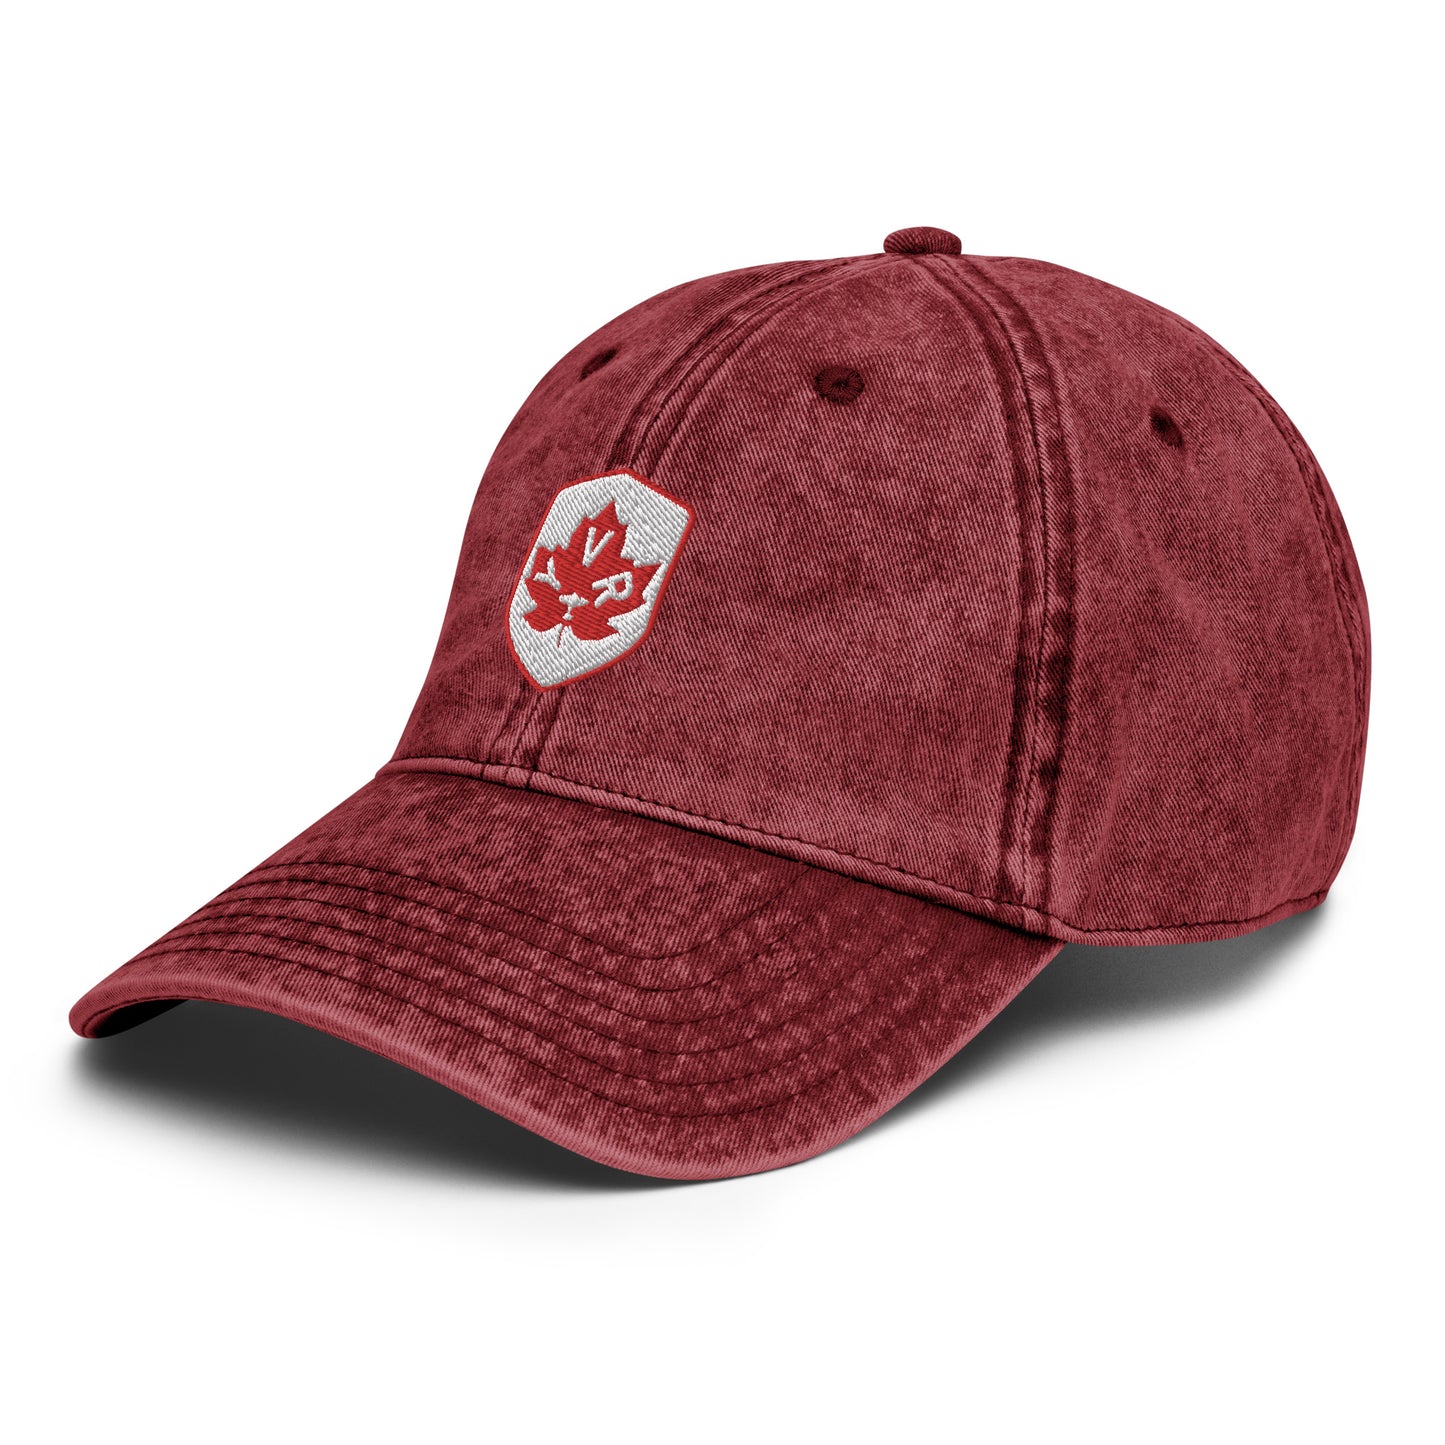 Maple Leaf Twill Cap - Red/White • YVR Vancouver • YHM Designs - Image 18